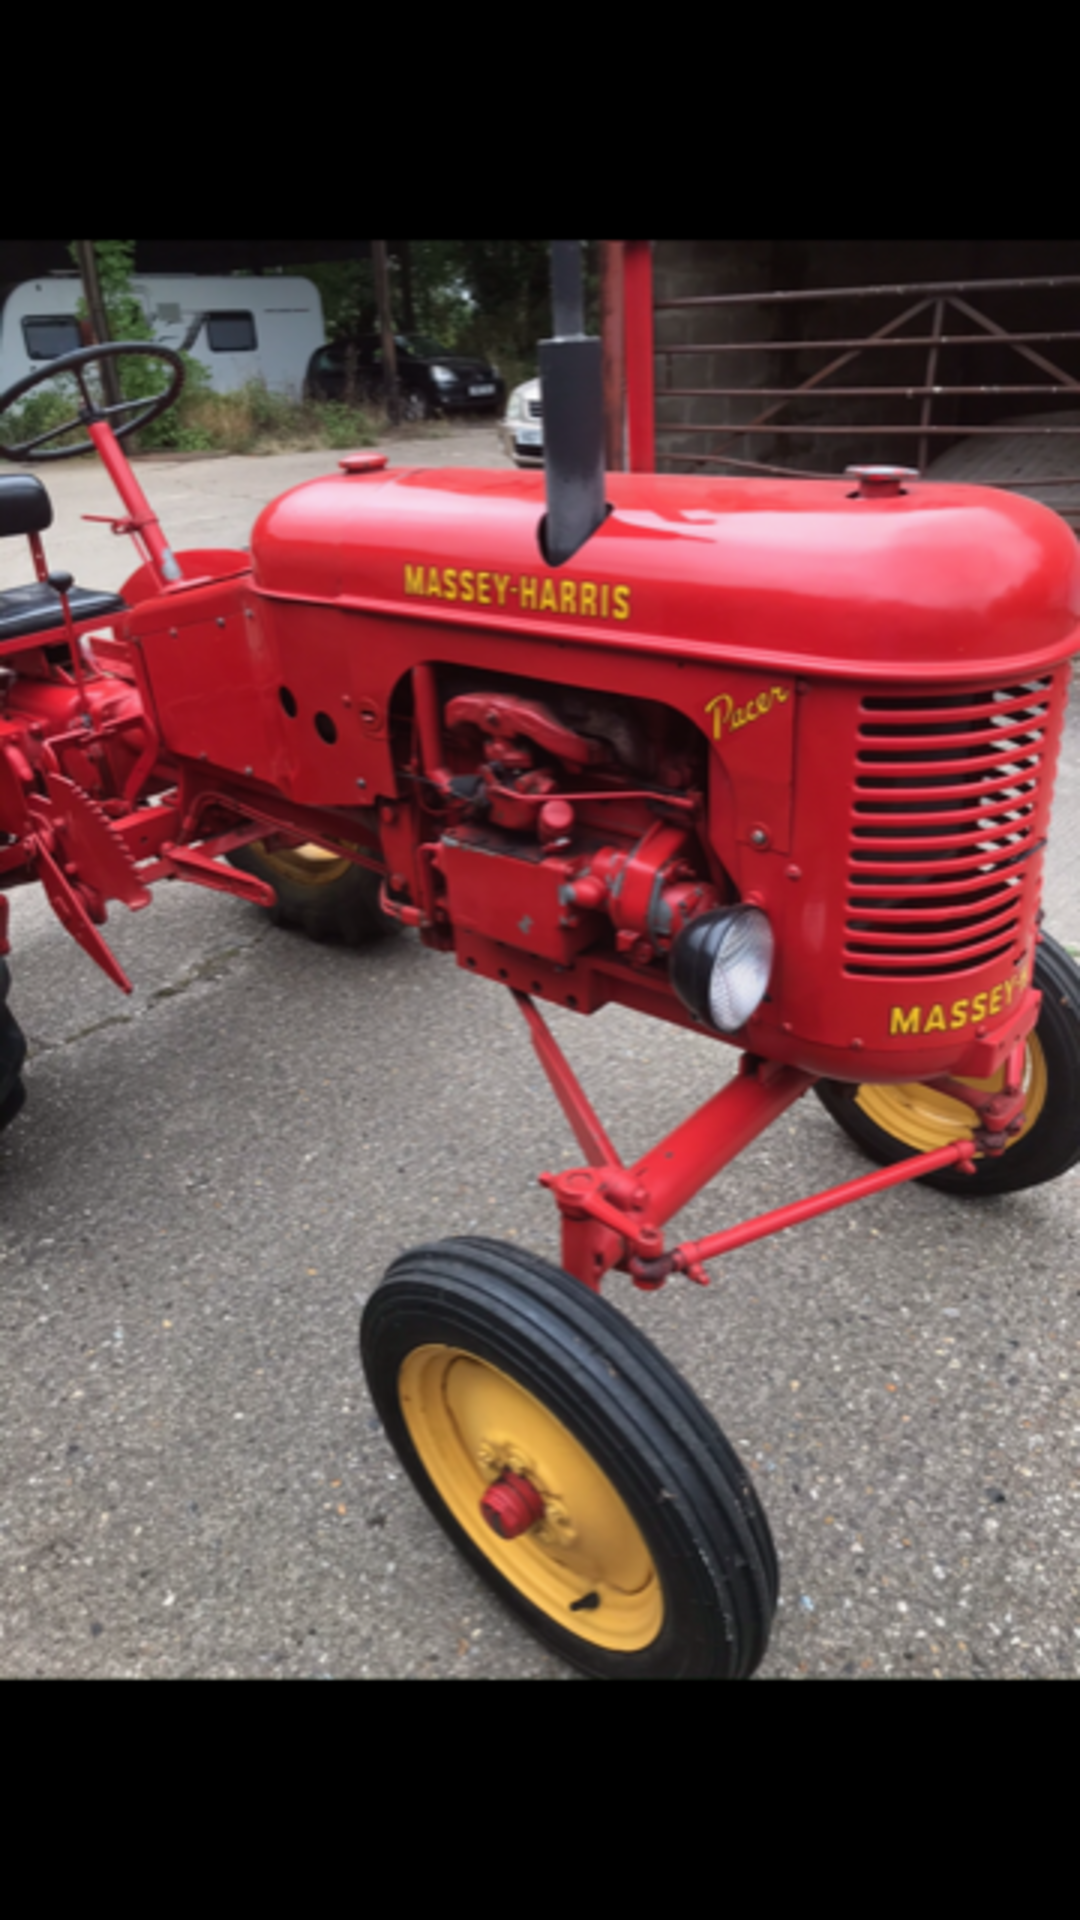 Massey - Harris Pacer Model 16, 1954. Stored near Bungay, Suffolk. No VAT on this item. - Image 2 of 8